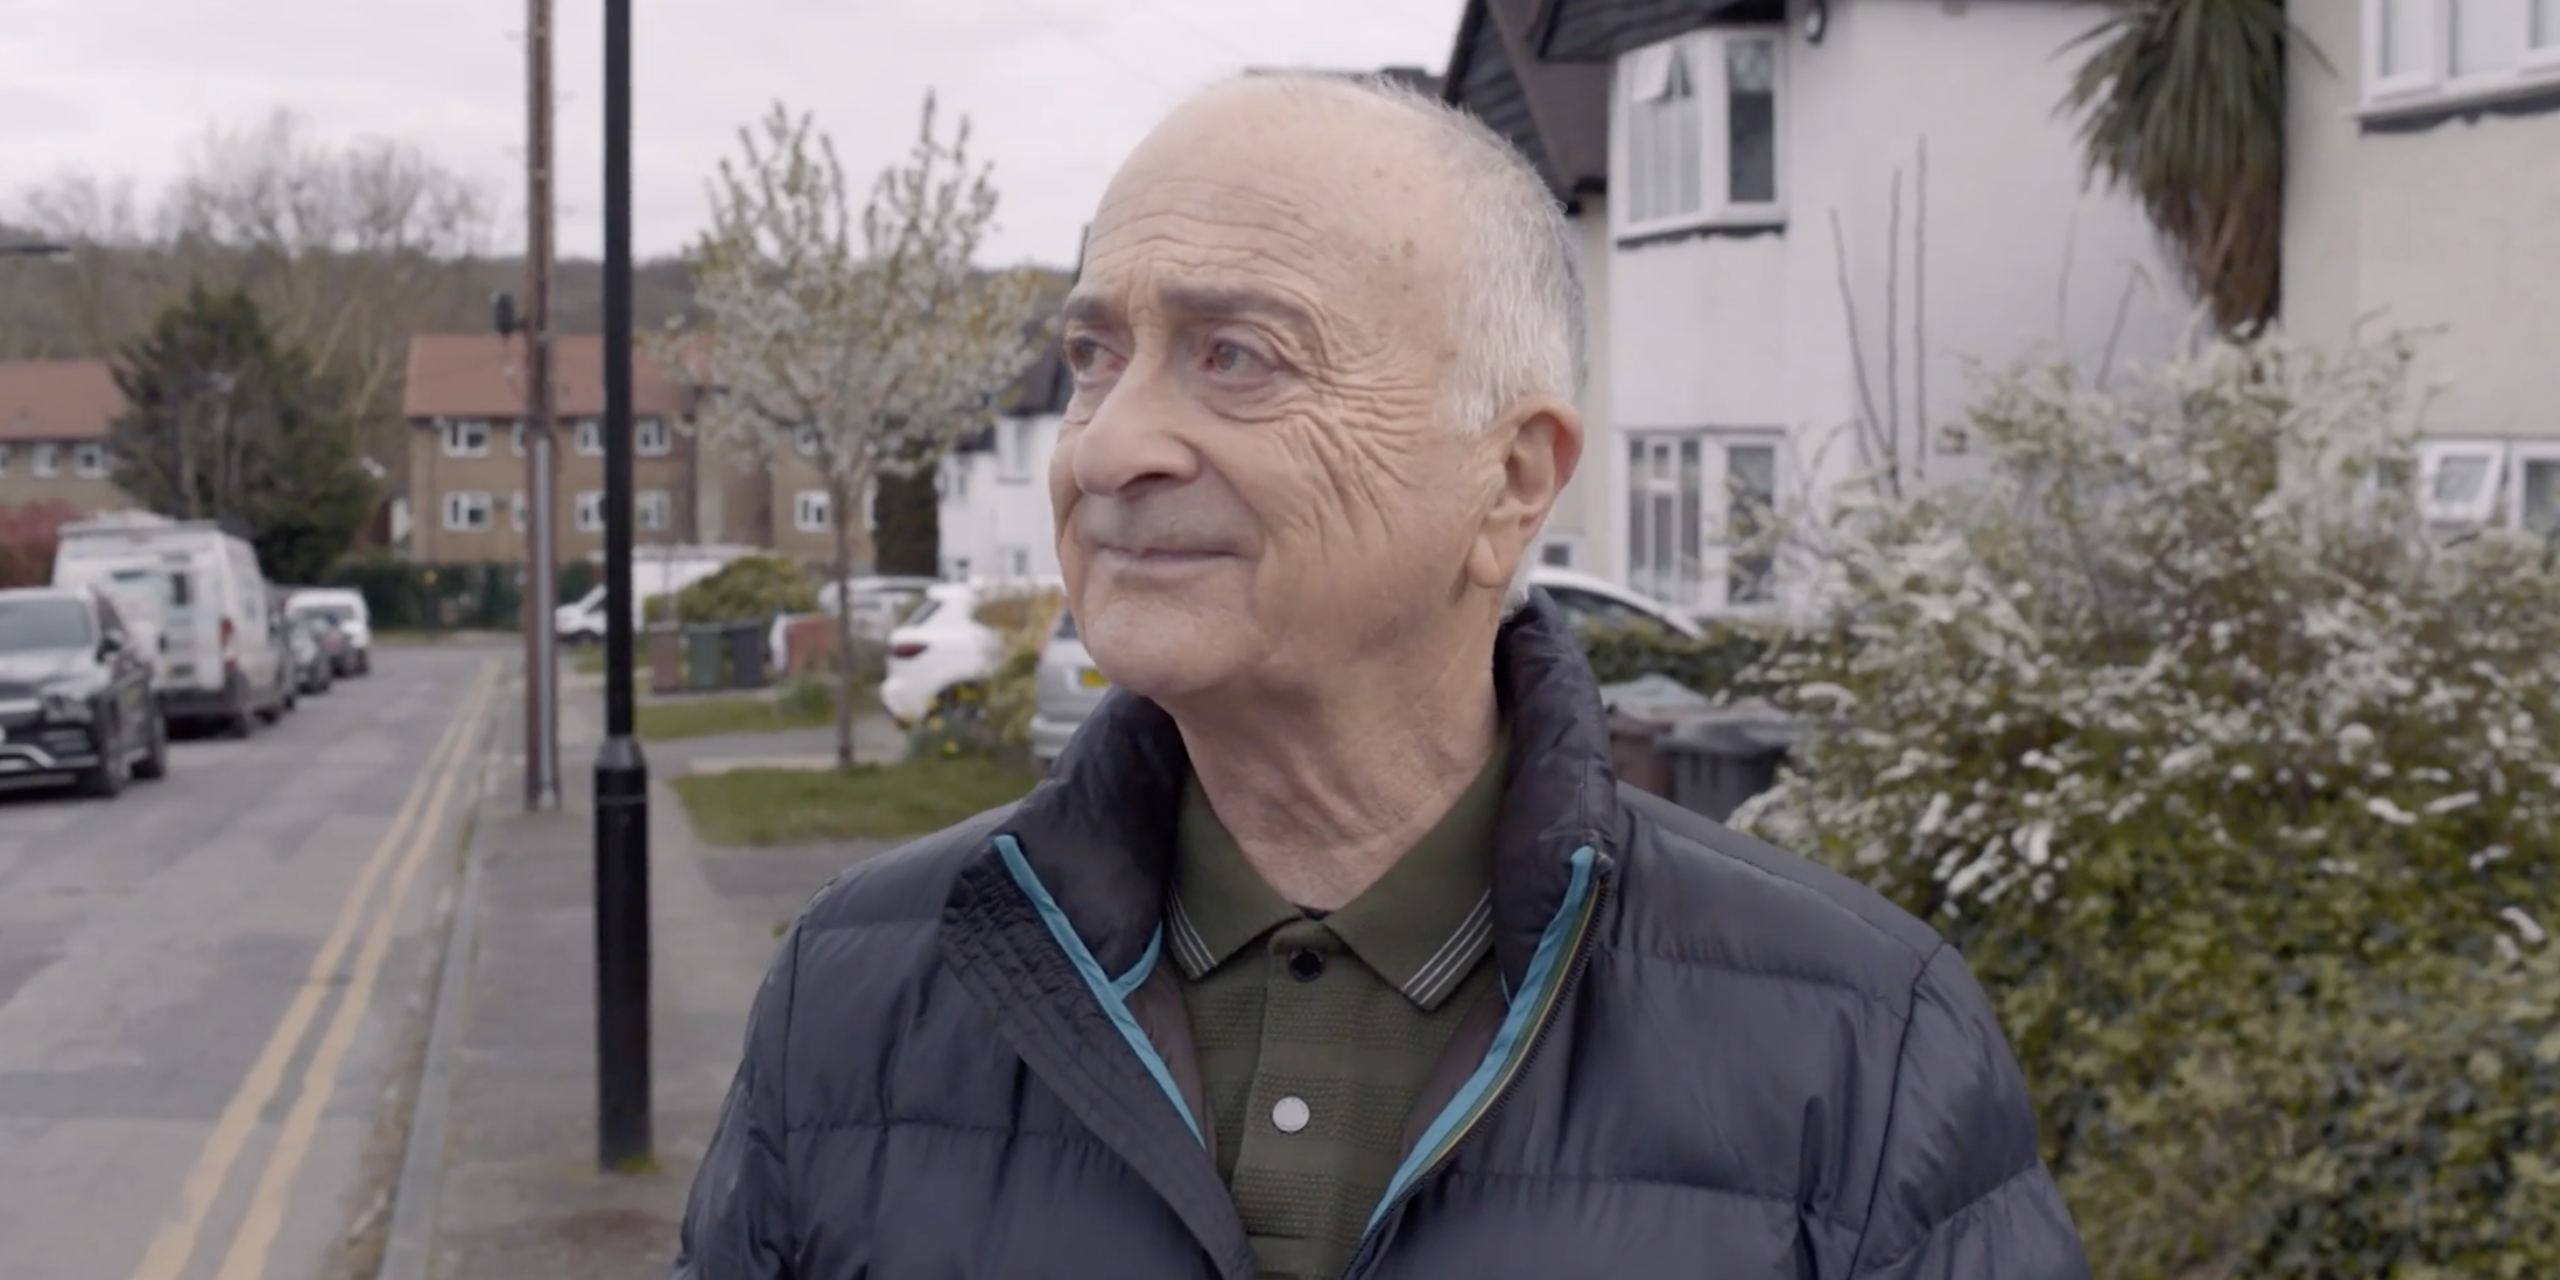 Tony Robinson looks out to the right while standing on a residential street